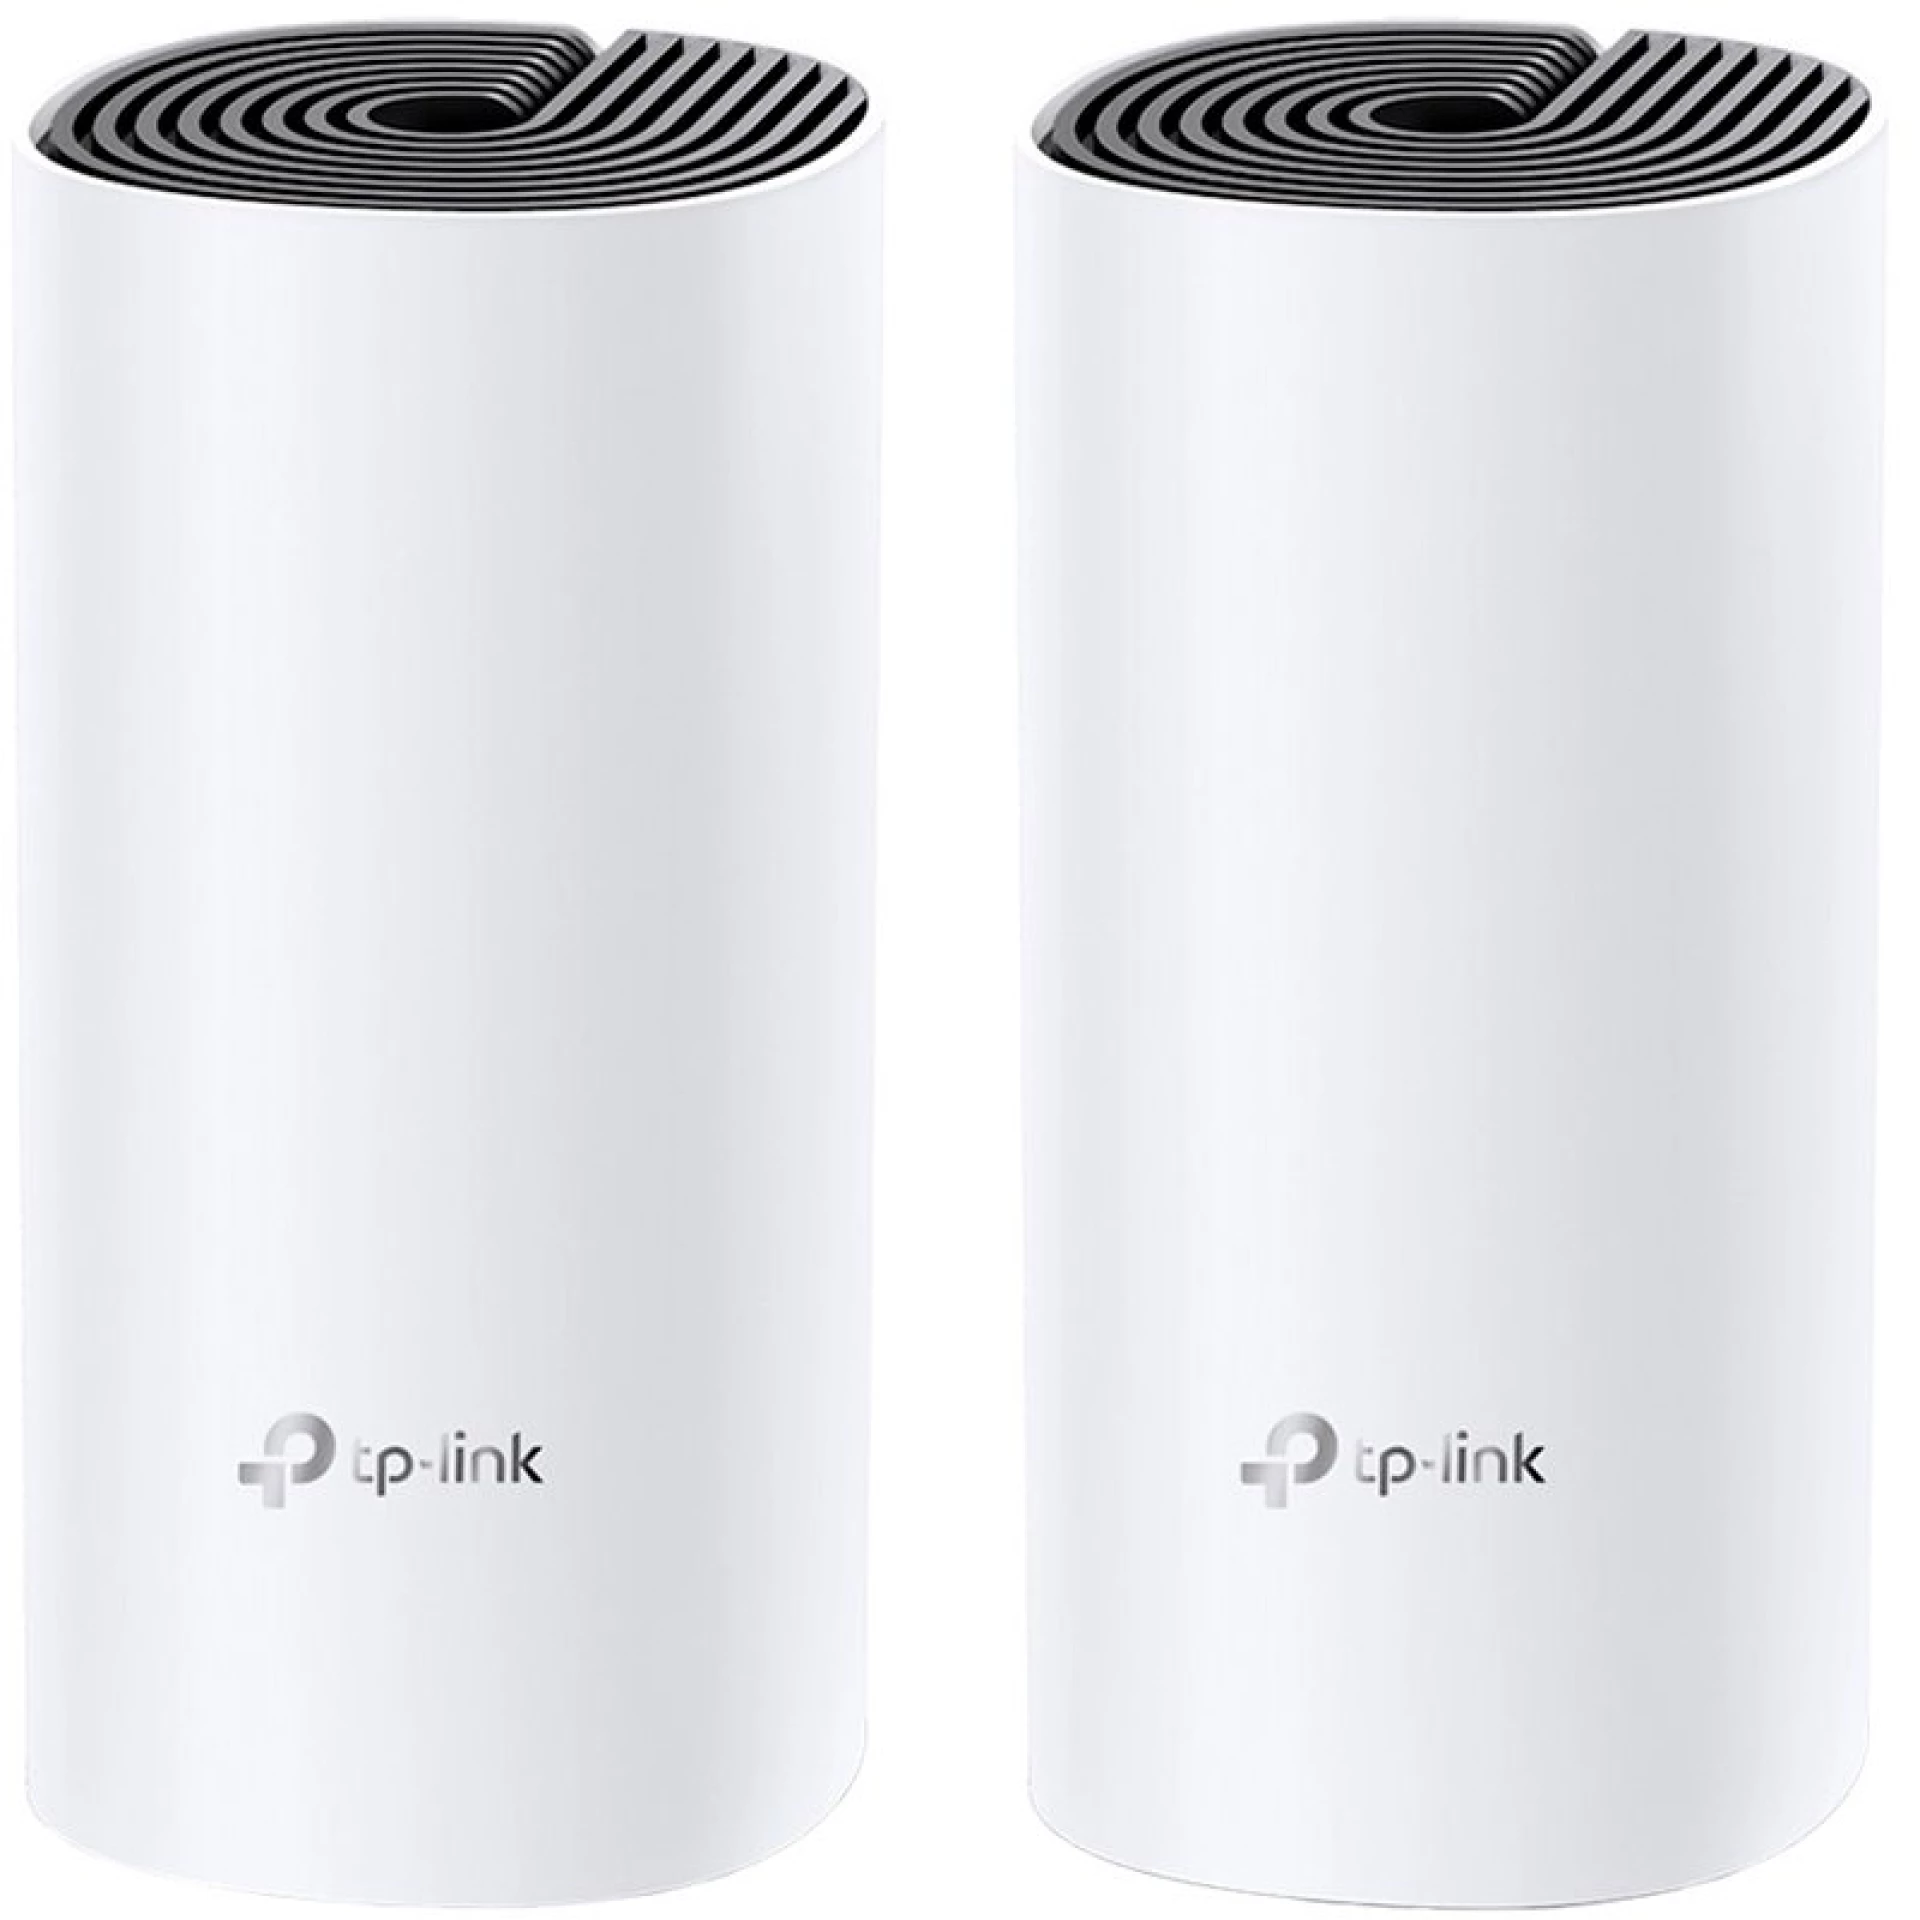 TP-Link Deco M4 (2-pack) AC1200 Whole-Home Mesh Wi-Fi System,Qualcomm CPU,867Mbps at 5GHz+300Mbps at 2.4GHz,2 Gigabit Ports, 2 internal antennas,MU-MIMO, Beamforming,Parental Controls,QoS,Reporting,Access Point Mode,IPv6 Ready,Deco App